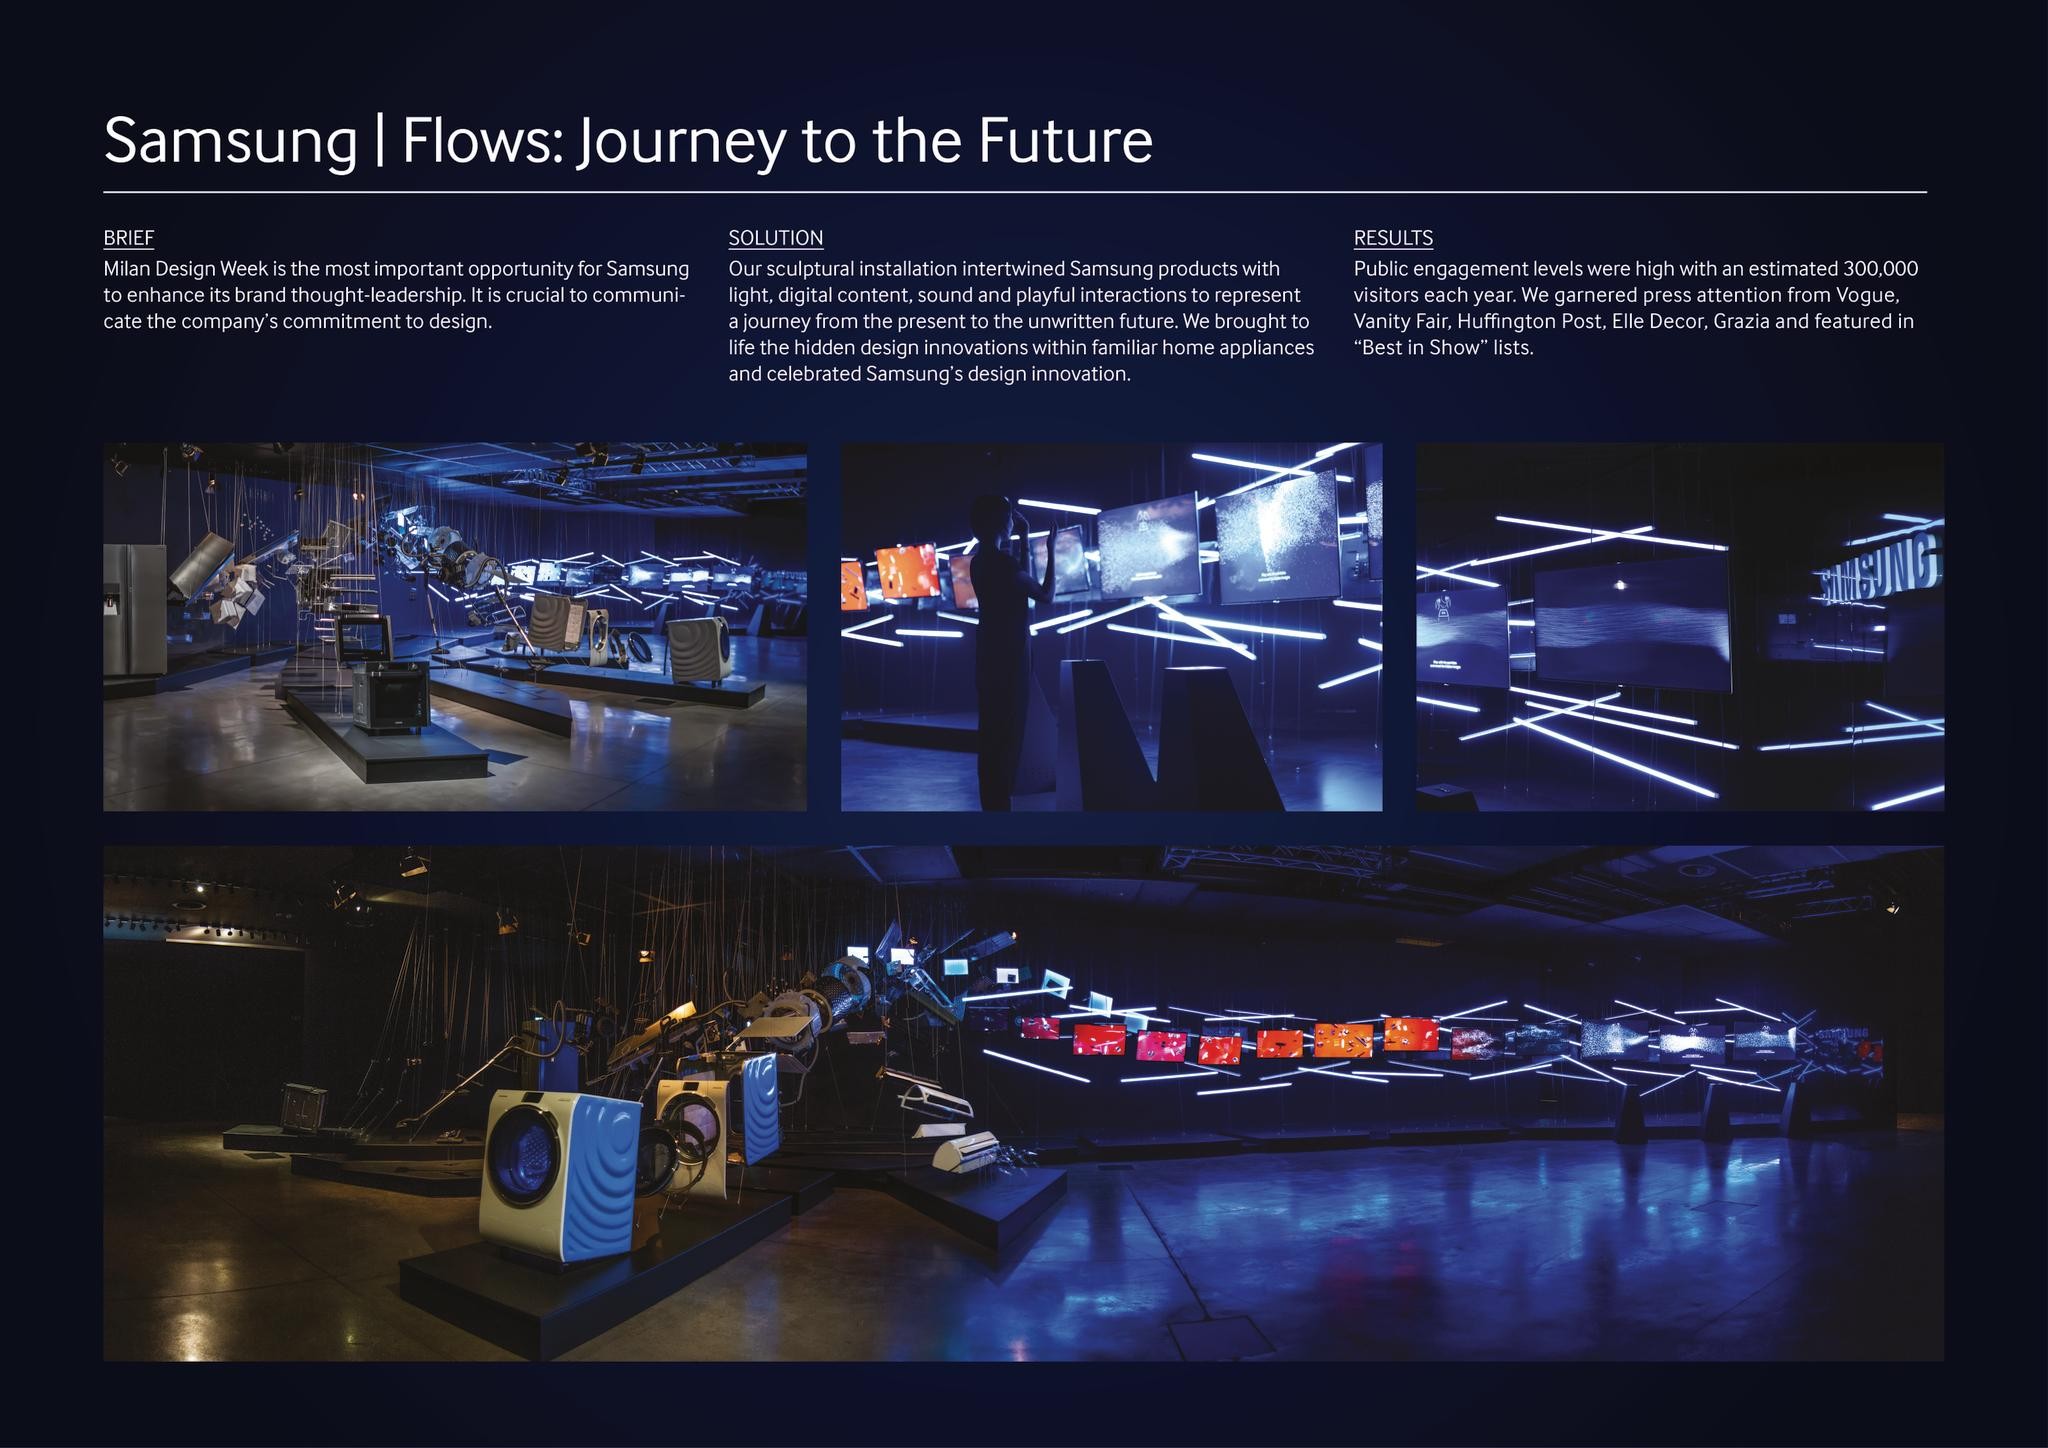 FLOWS: JOURNEY TO THE FUTURE INSTALLATION